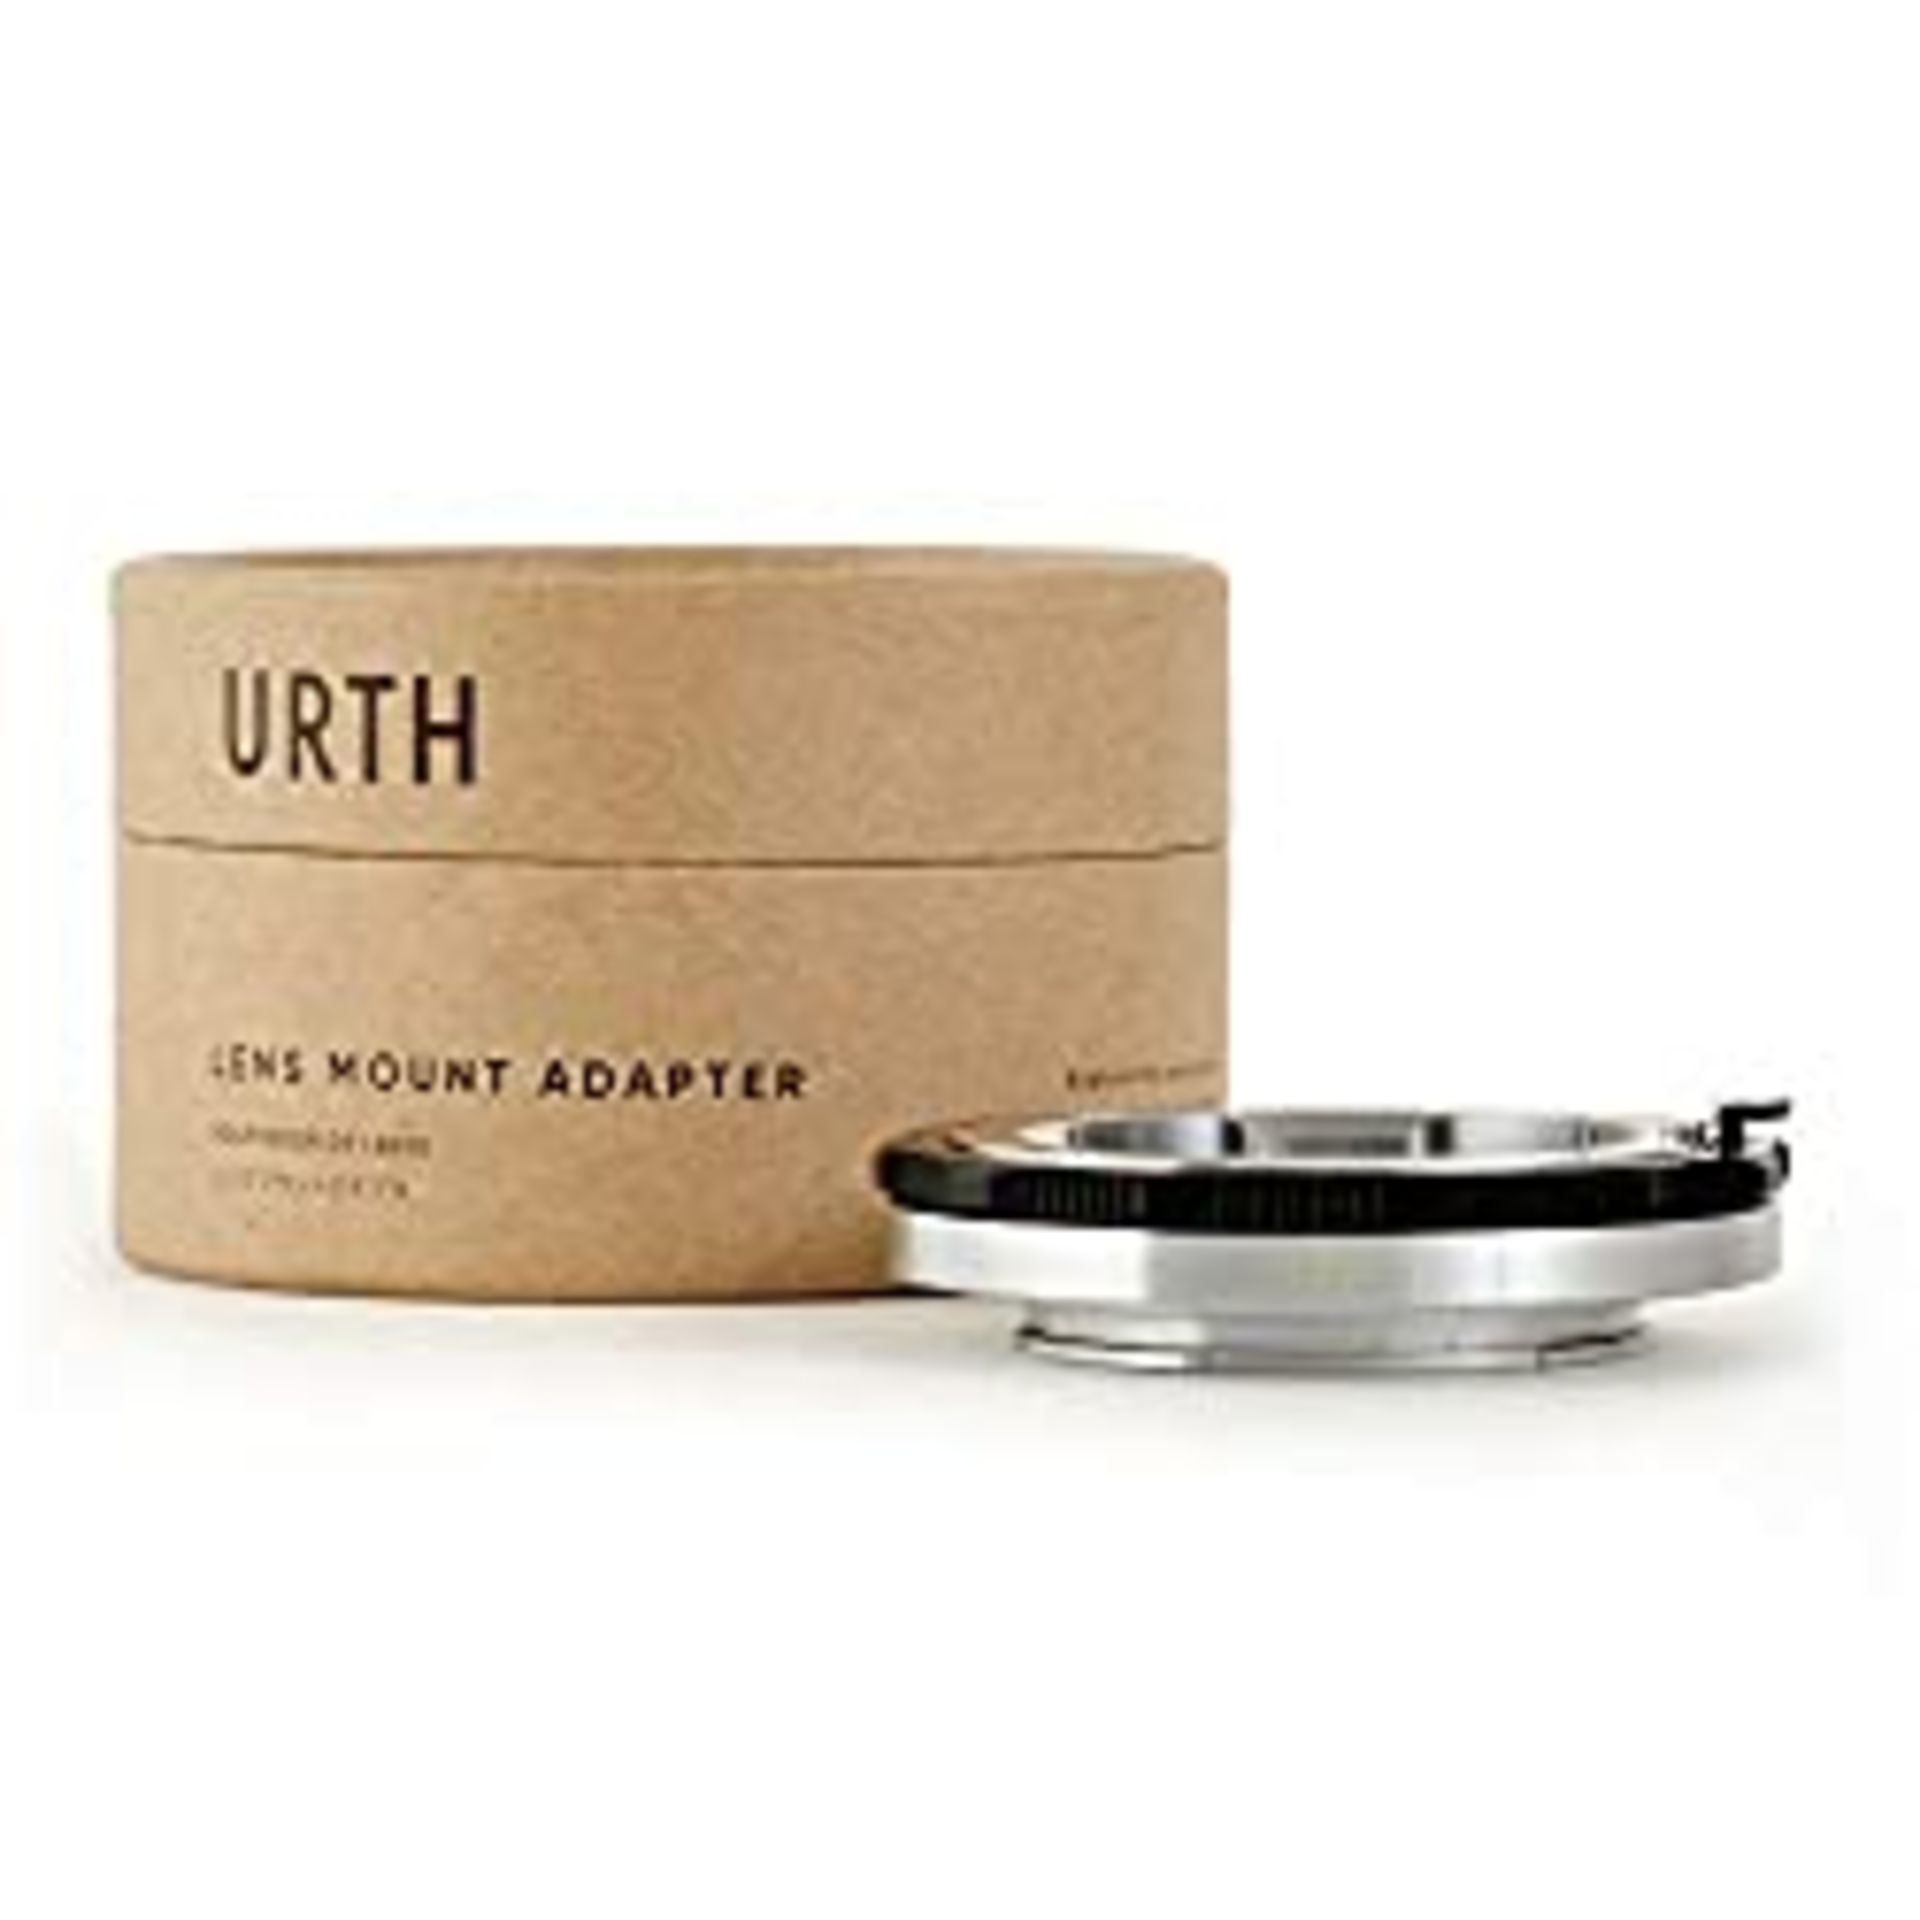 RRP £63.17 Urth Lens Mount Adapter: Compatible with Leica M Lens to Sony E Camera Body